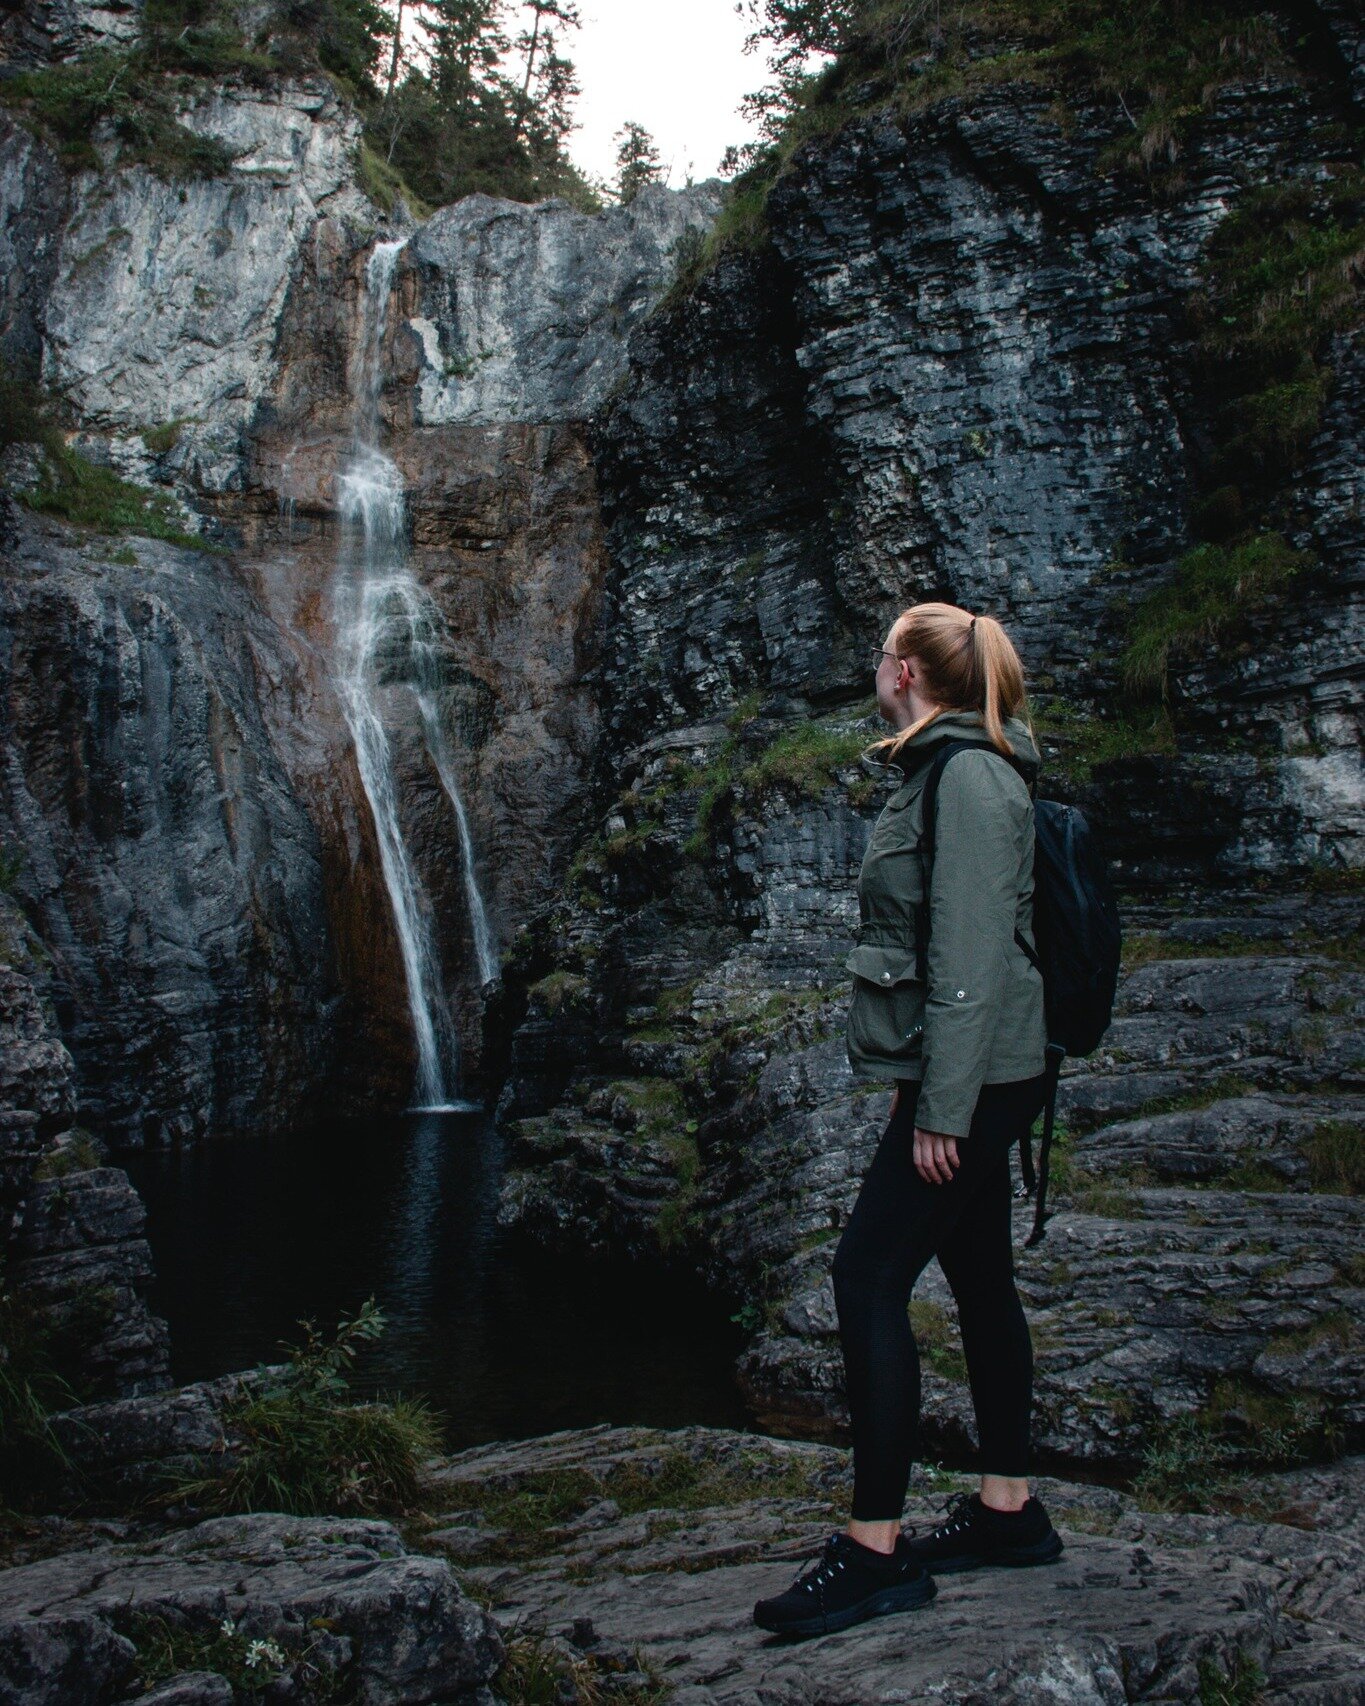 Waterfall adventures at Stuibenf&auml;lle near Plansee, Austria 🇦🇹🌊

This place is perfect for an easy and (relatively) flat four-kilometre loop hike. Start in the early morning to beat the crowds and take your time along the way to find hidden ge